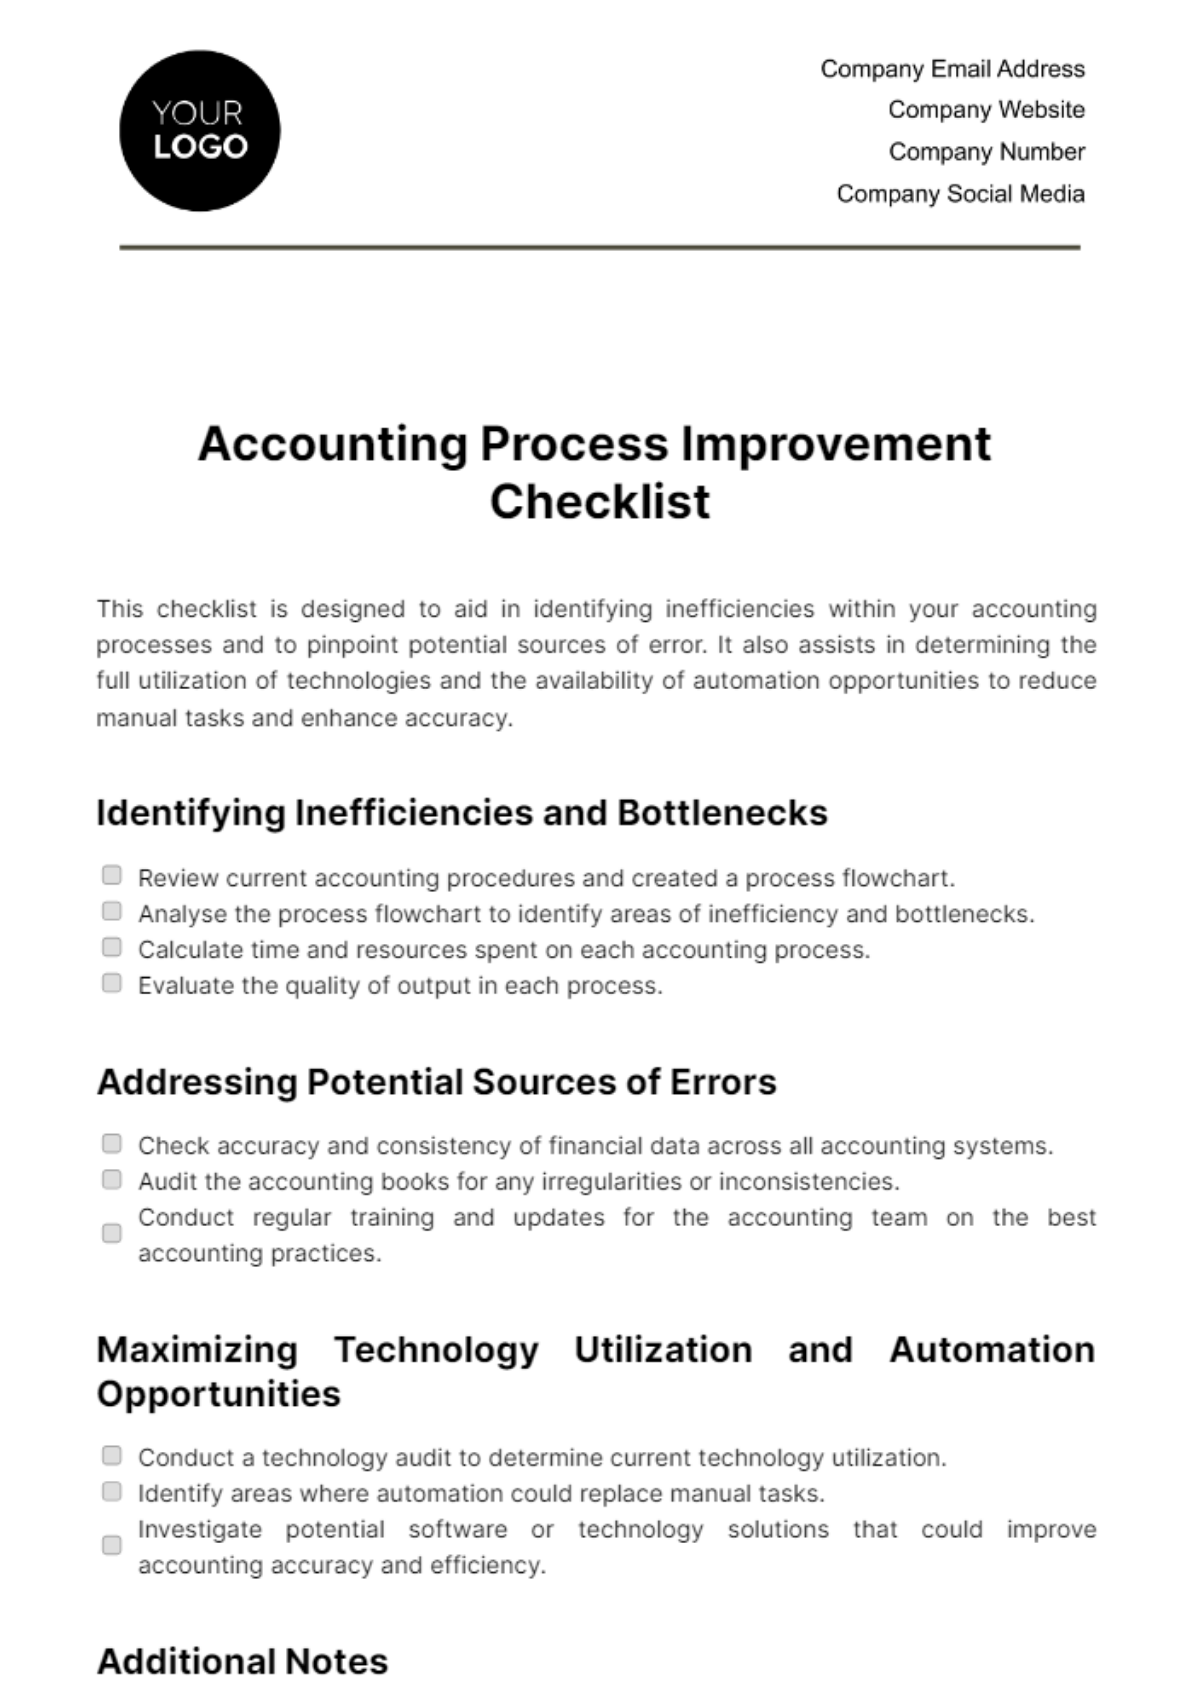 Free Accounting Process Improvement Checklist Template